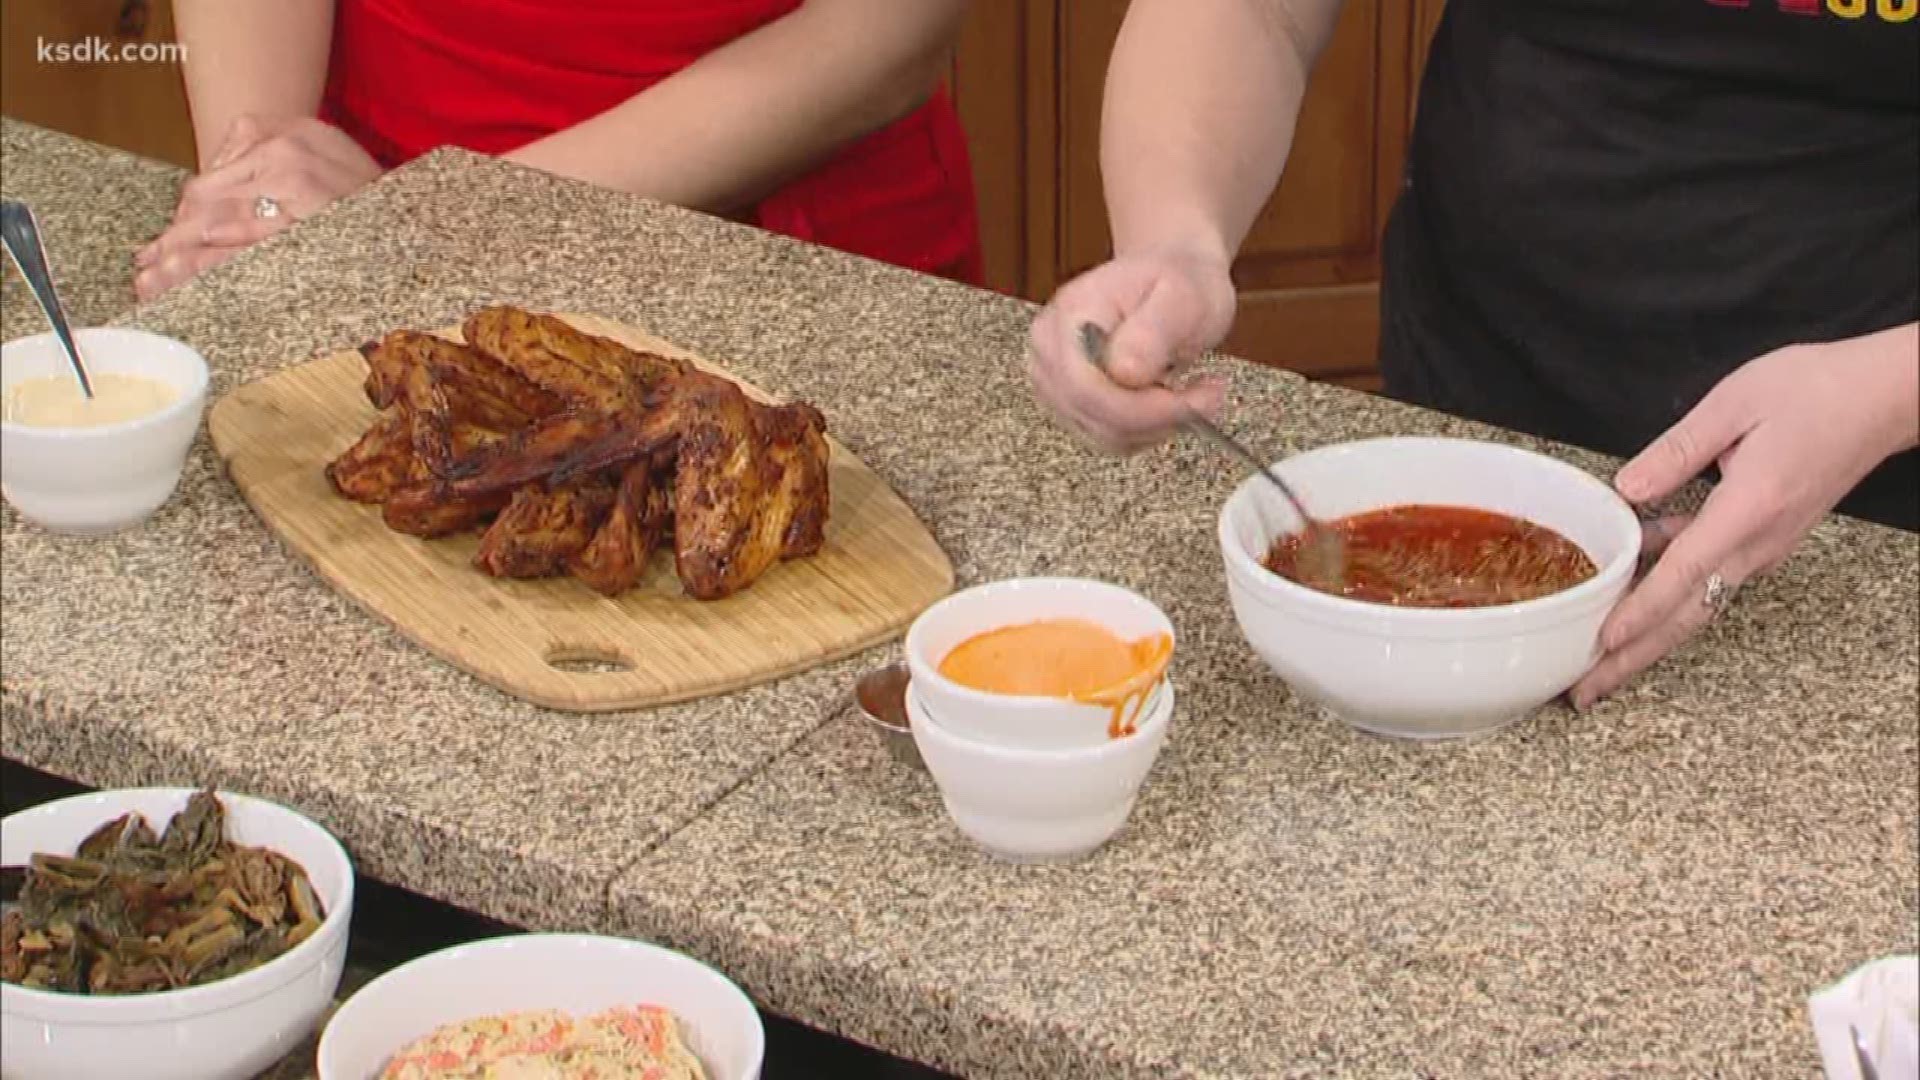 Knockout BBQ shared a great recipe for the big game next weekend!